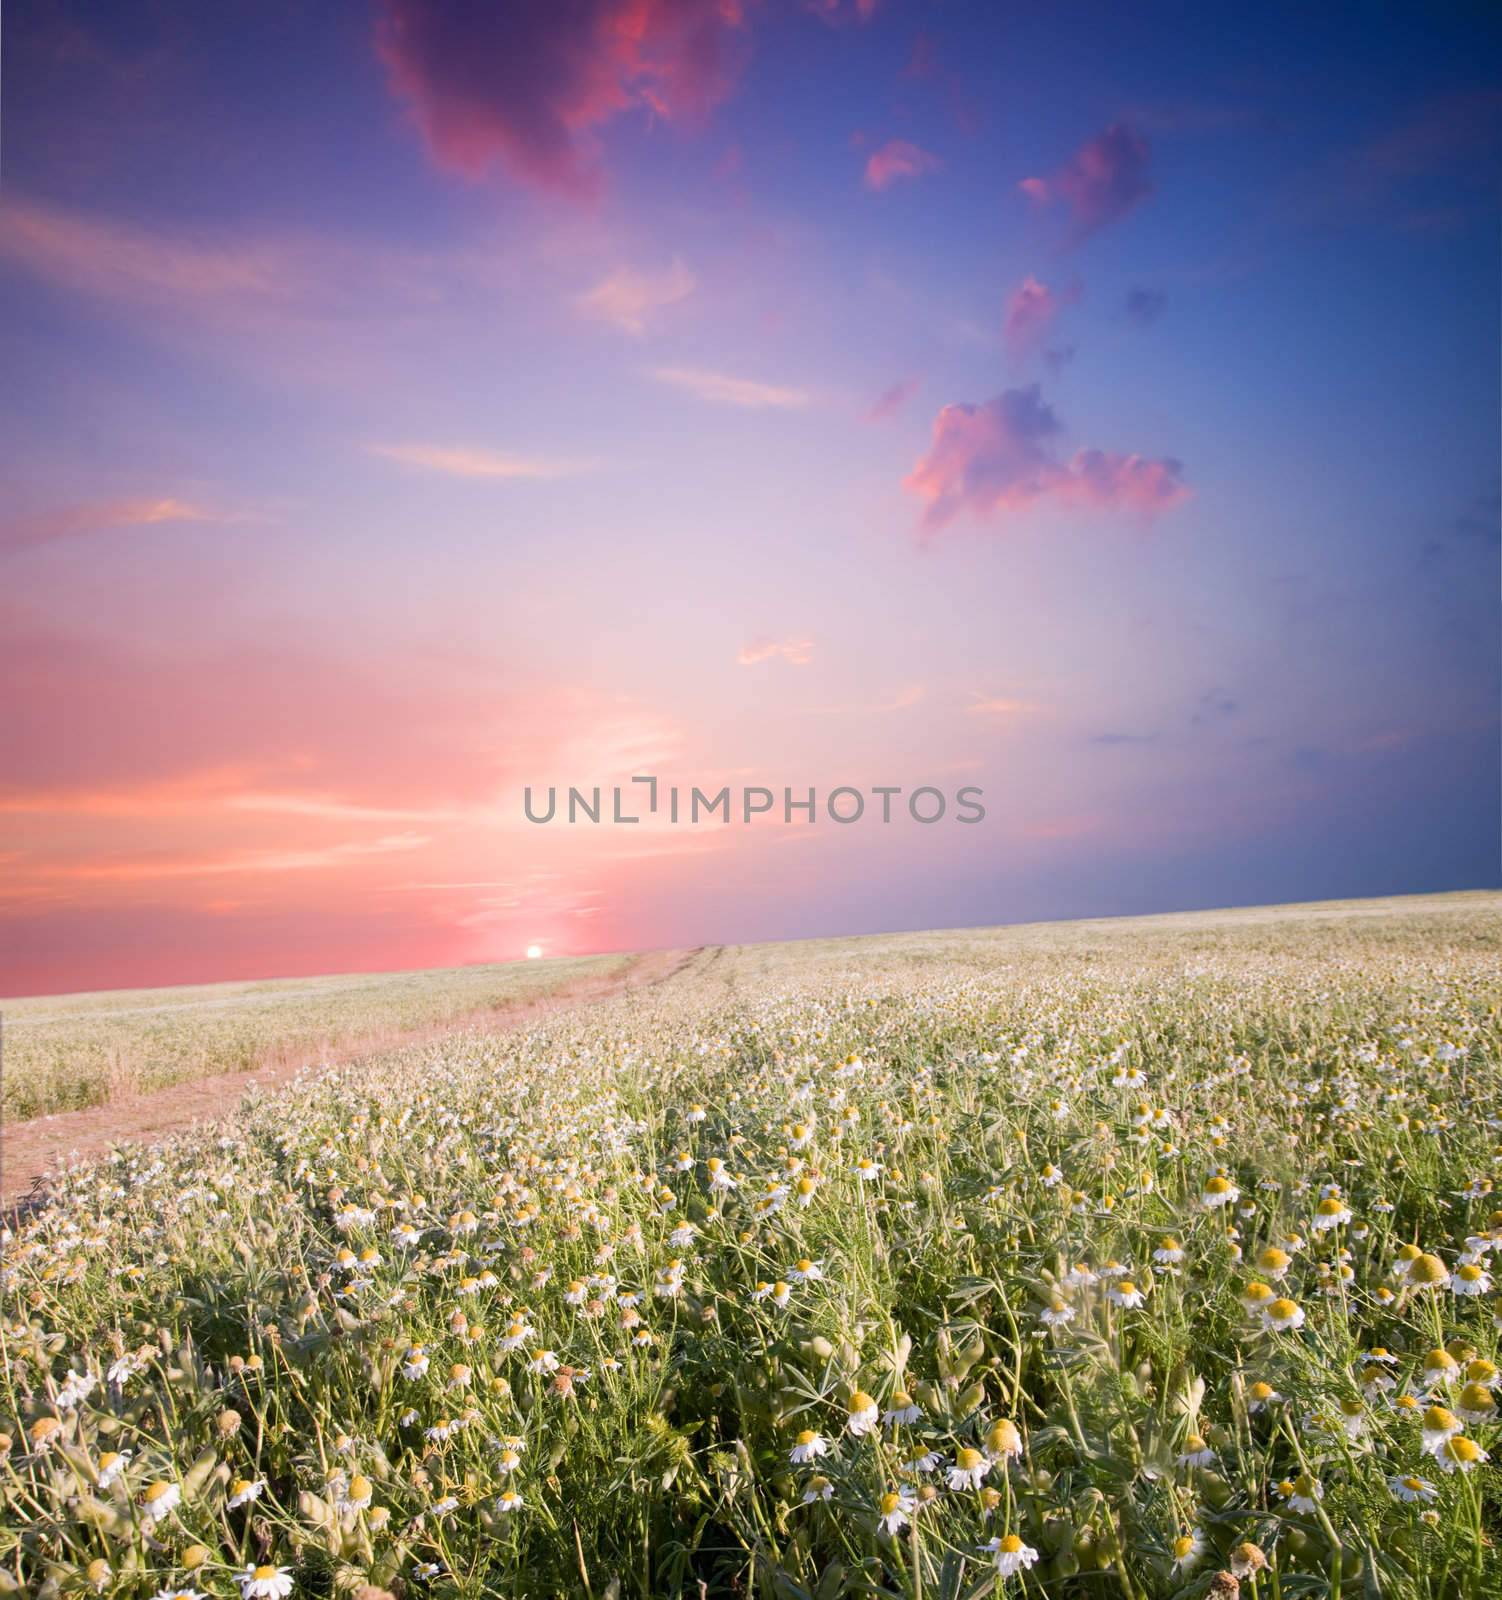 Sunrise with colorful morning sky with over land full of flowers